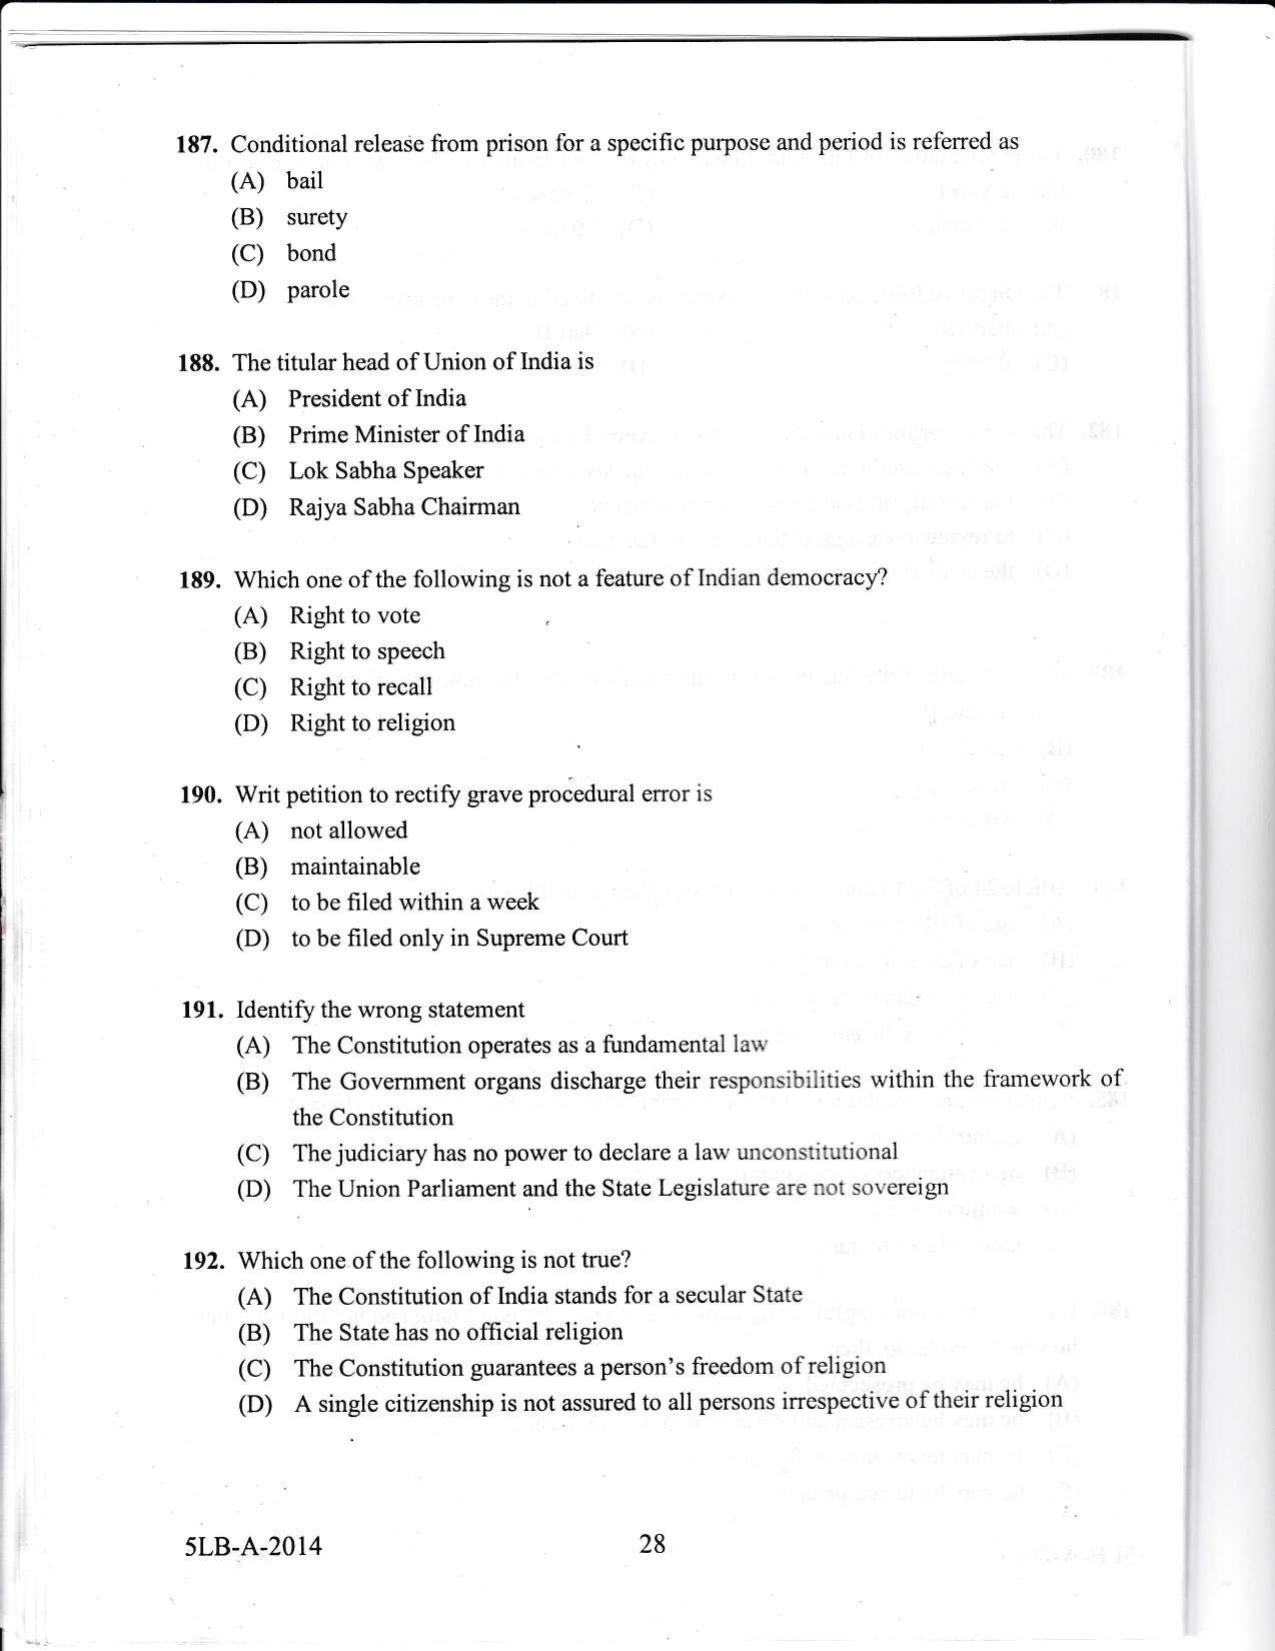 KLEE 5 Year LLB Exam 2014 Question Paper - Page 28